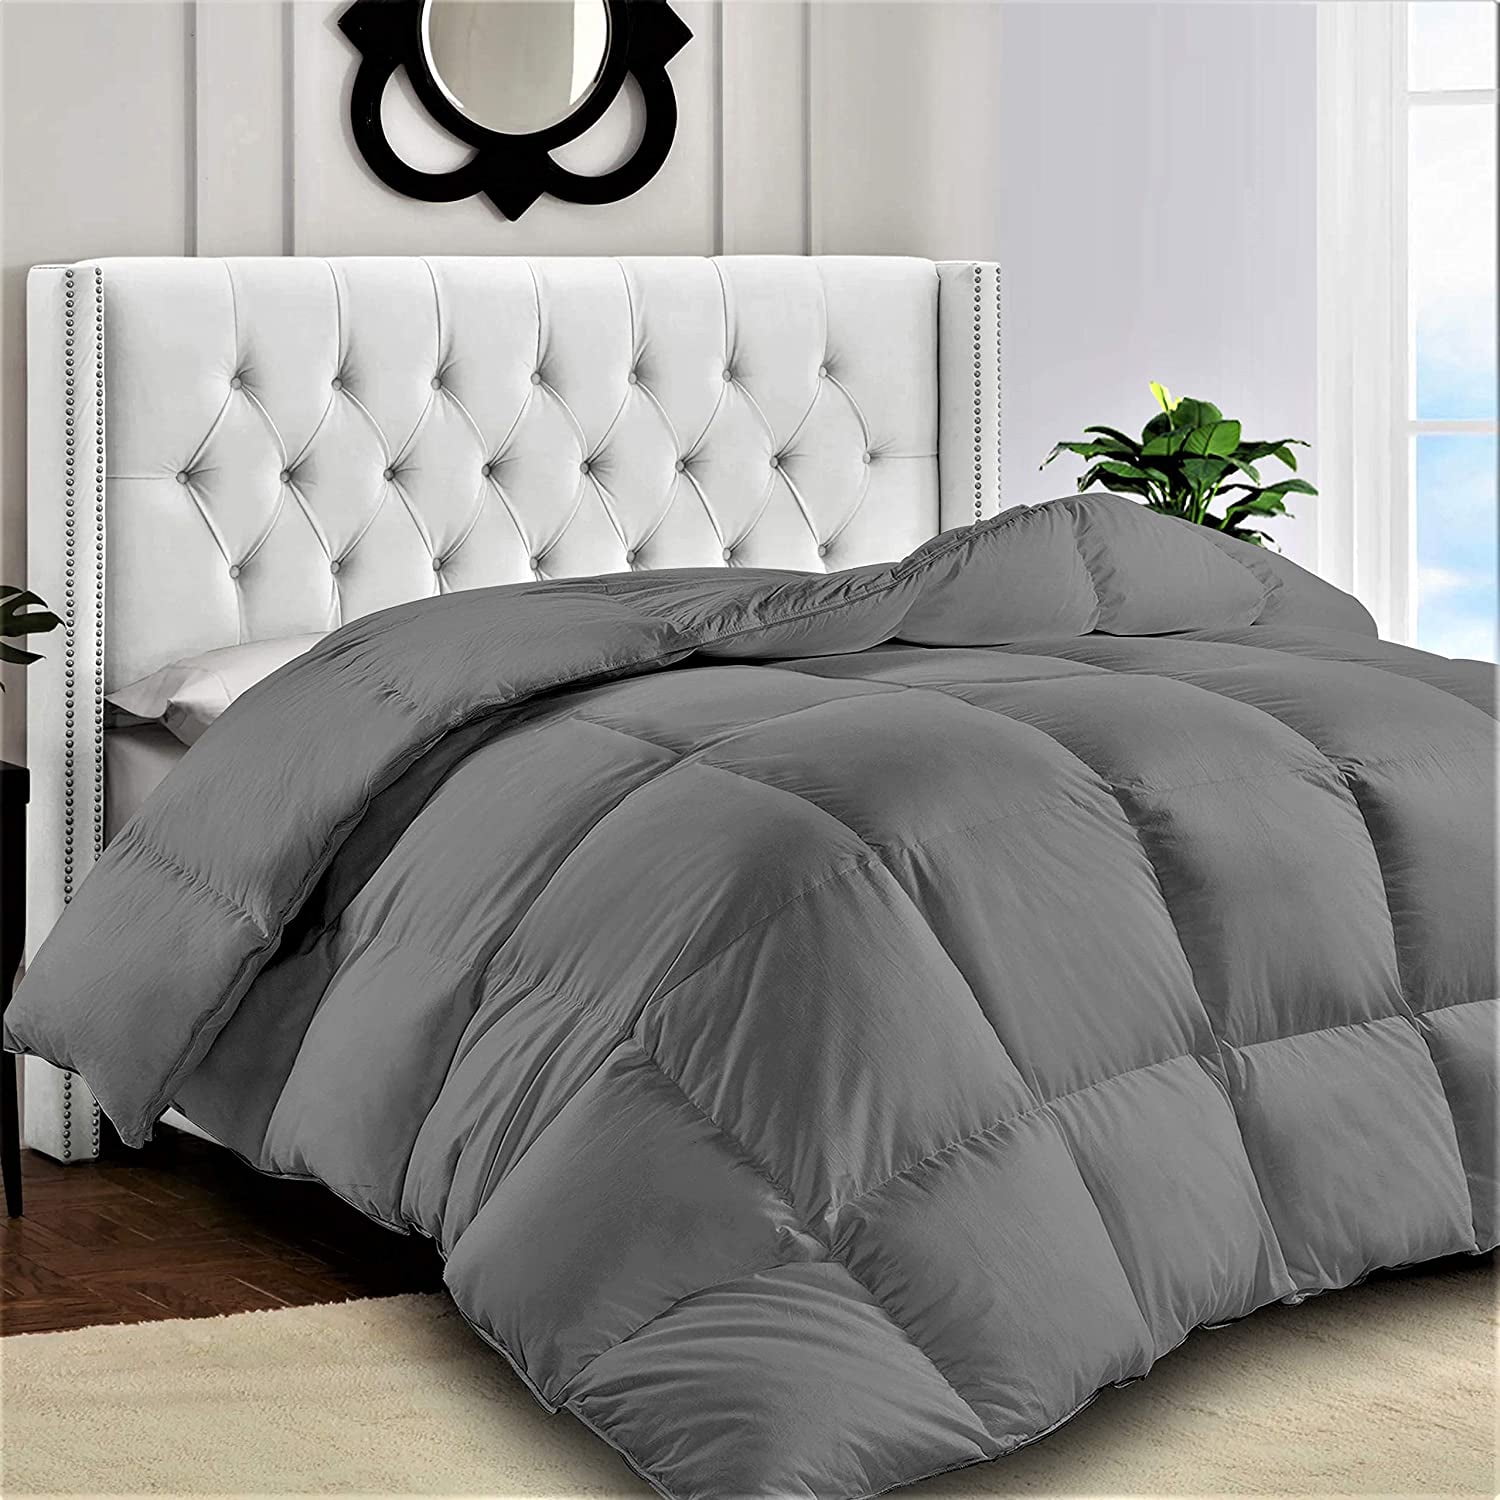 Hisouler Down Alternative Comforter Twin All Season Soft Quilted Reversible Duvet Insert with 8 Corner Tabs 300GSM Plush Microfiber Fill Fluffy Grey/White Stripe 64x88 inches